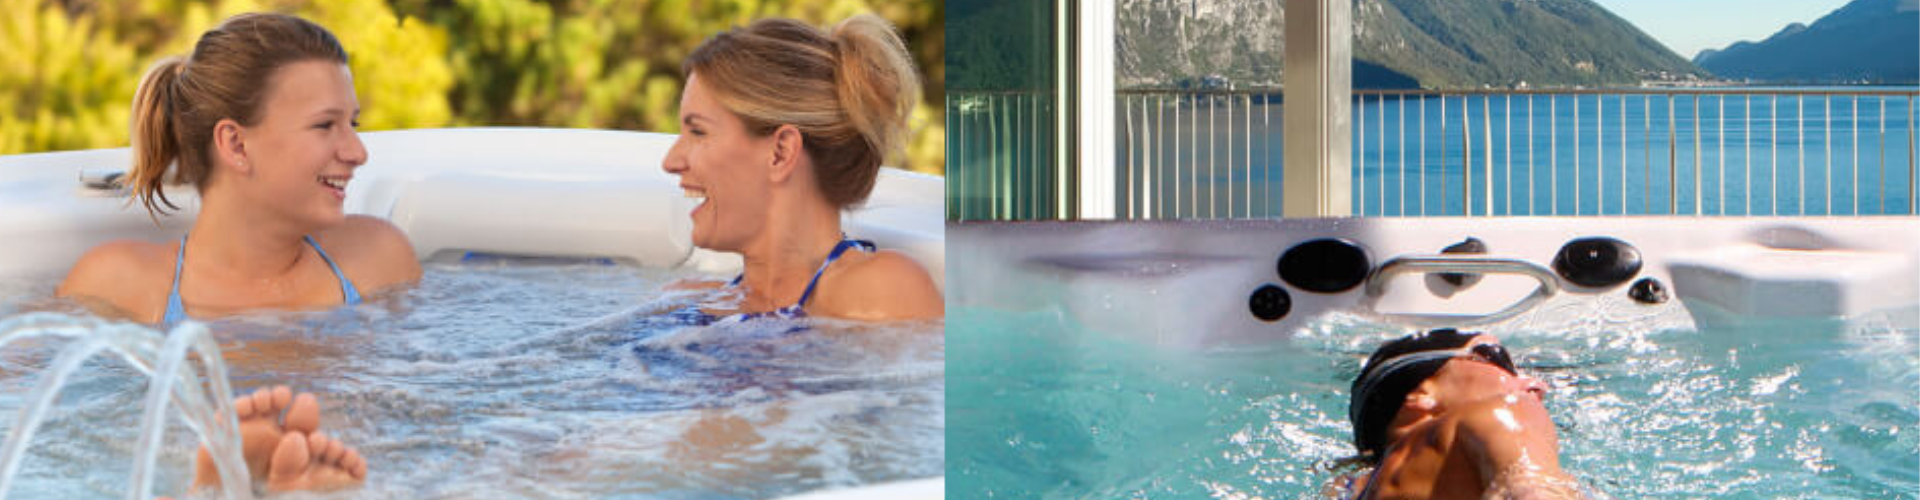 Is Soaking in a Hot Tub Before or After Exercise Good for Sore Muscles?